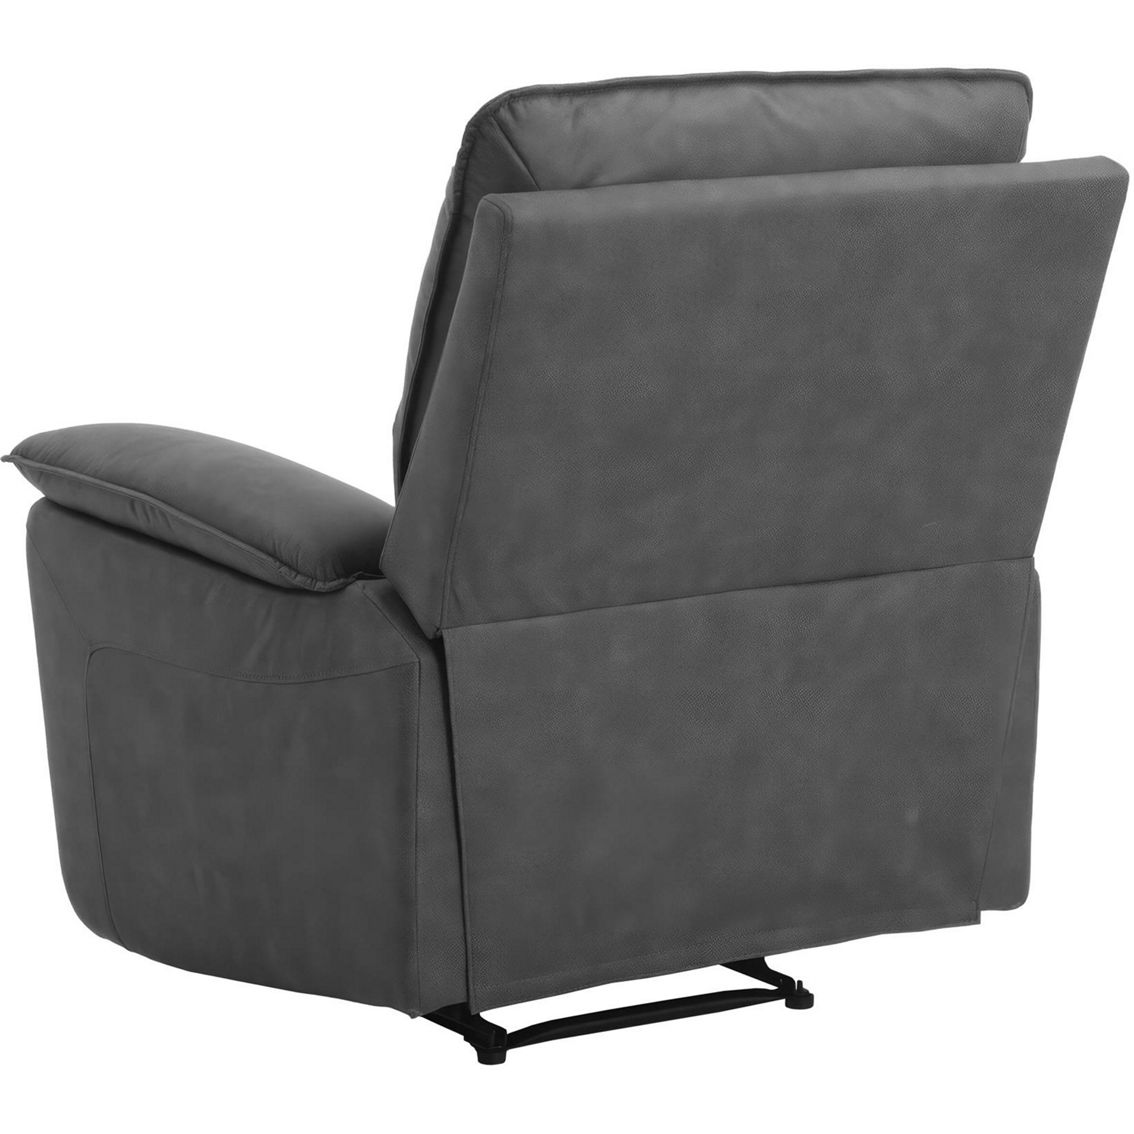 DHP Labatte Recliner with Dual USB Port, Charcoal Faux Leather - Image 2 of 8